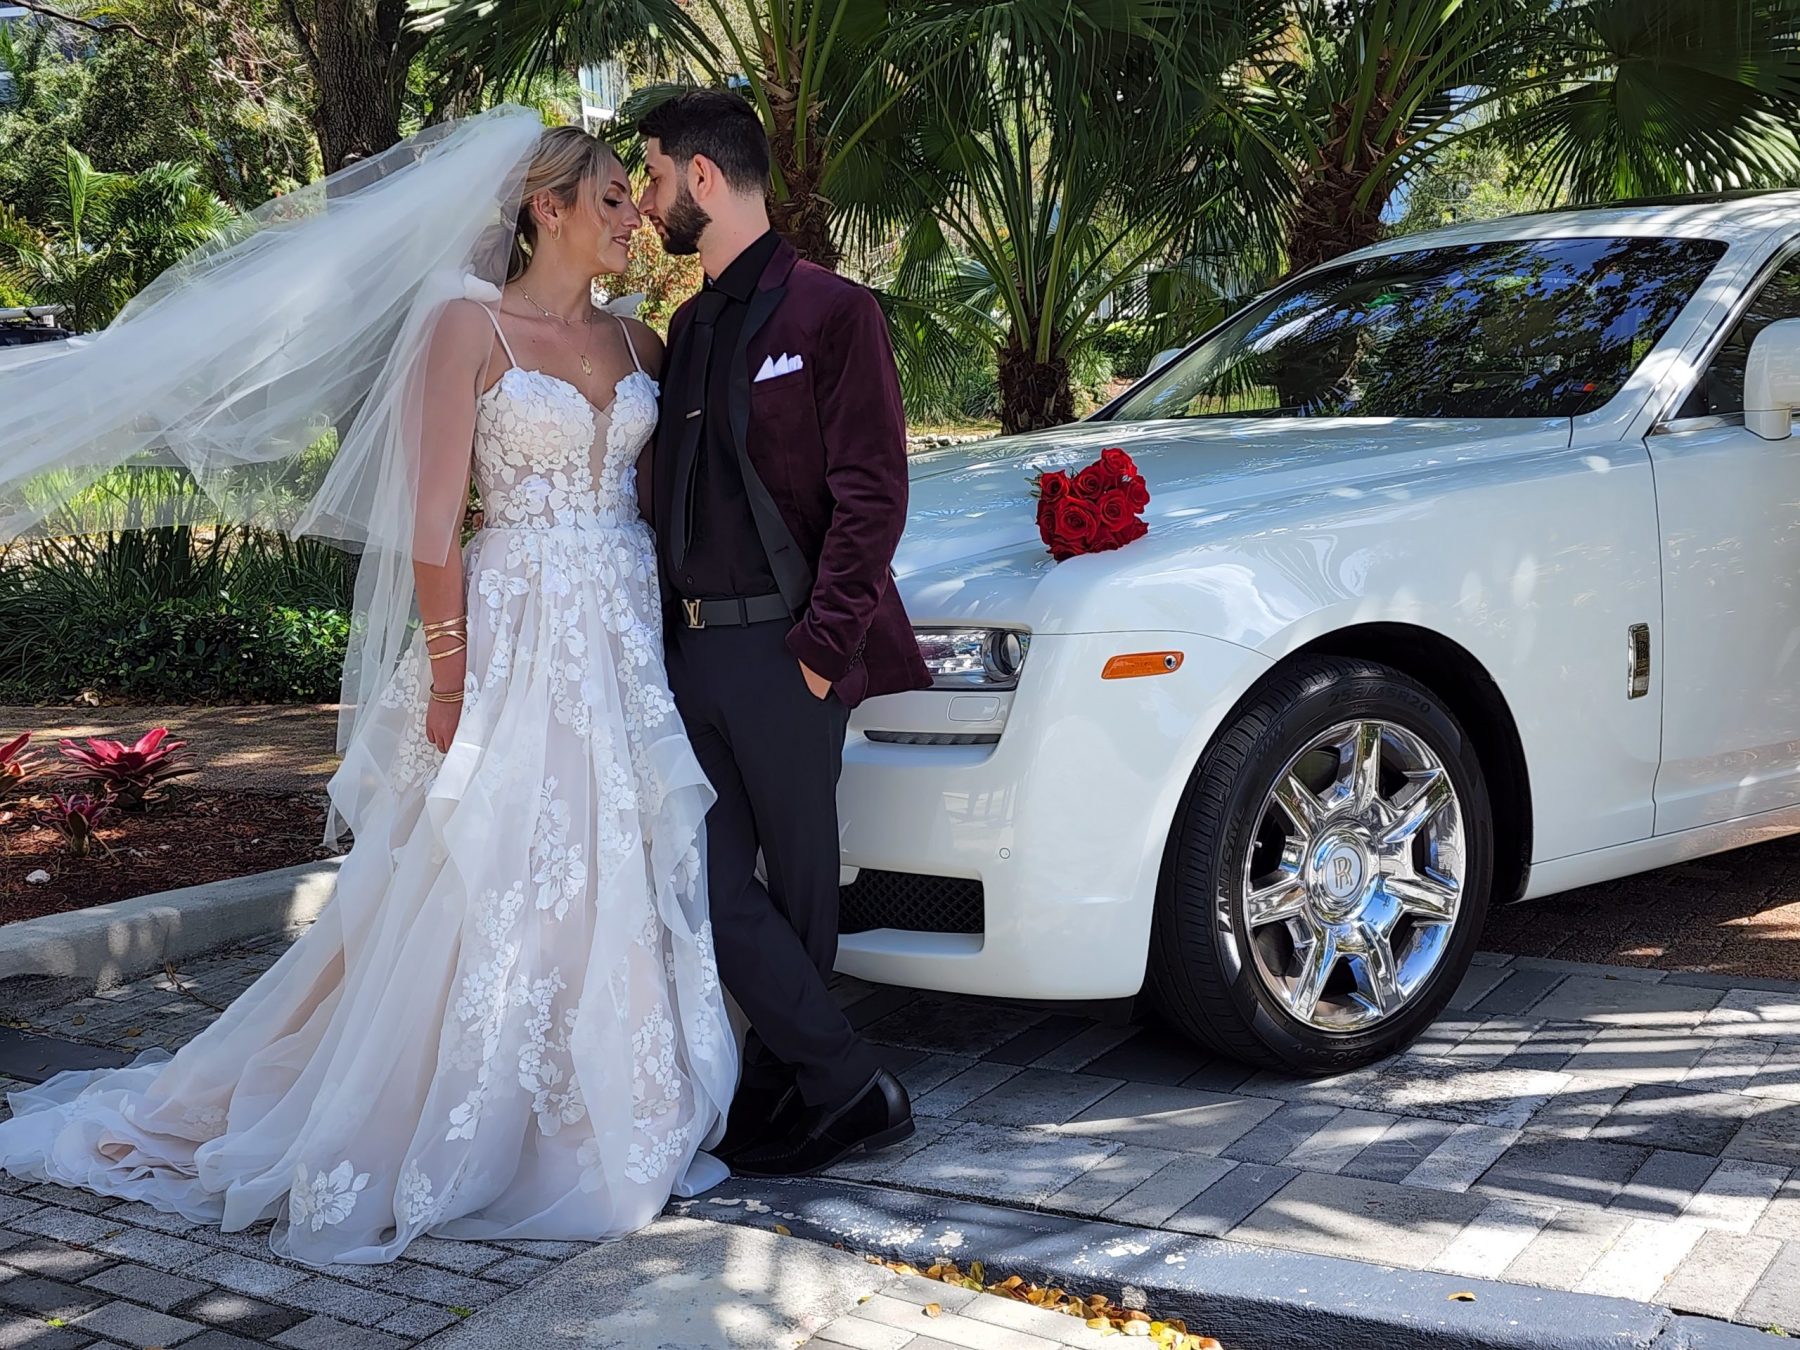 Wedding Transportation Services Done Right: Paving the Way to Your Perfect Day